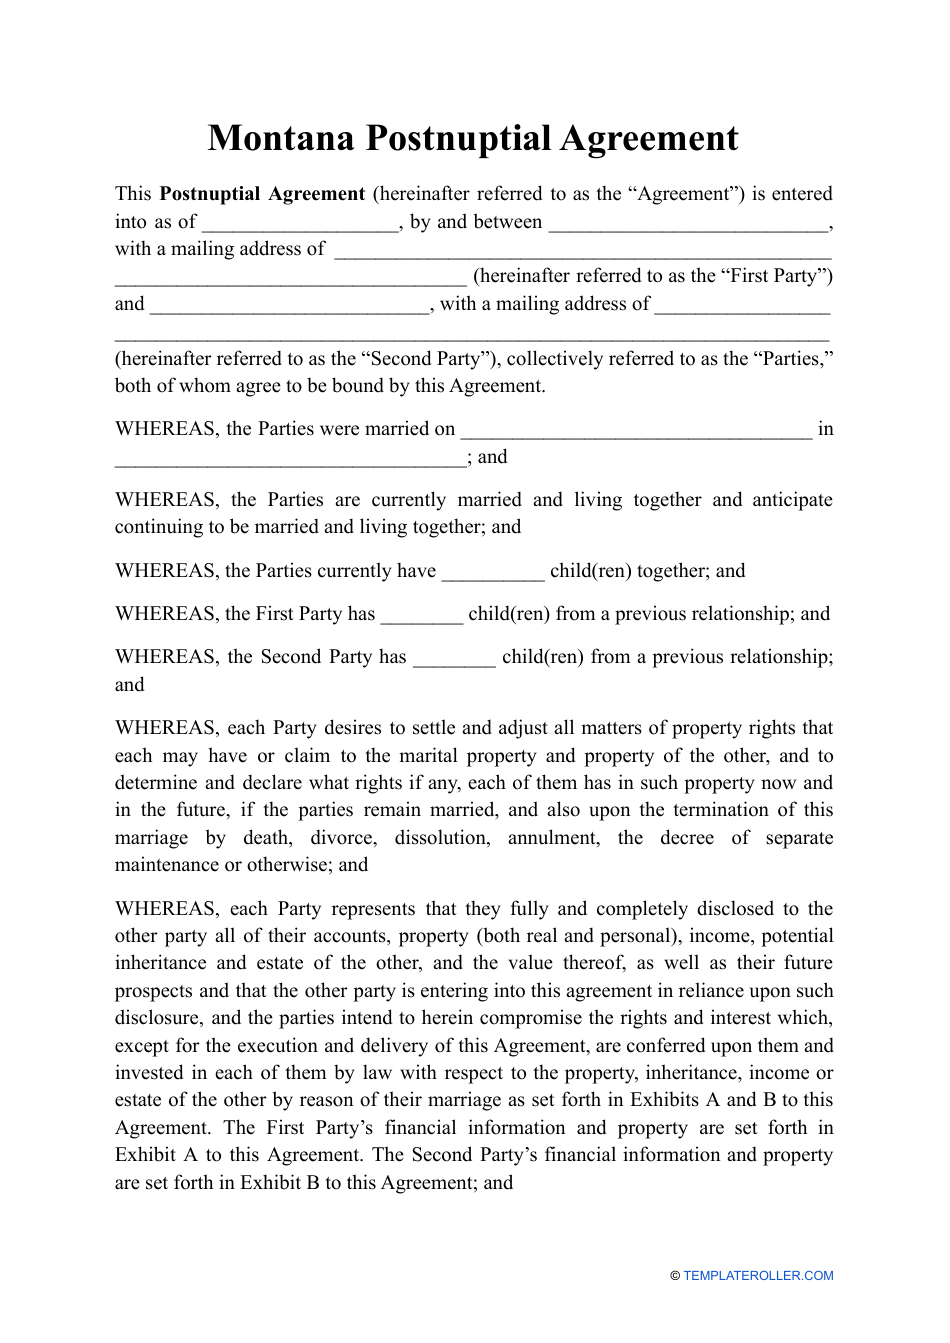 Postnuptial Agreement Template - Montana, Page 1